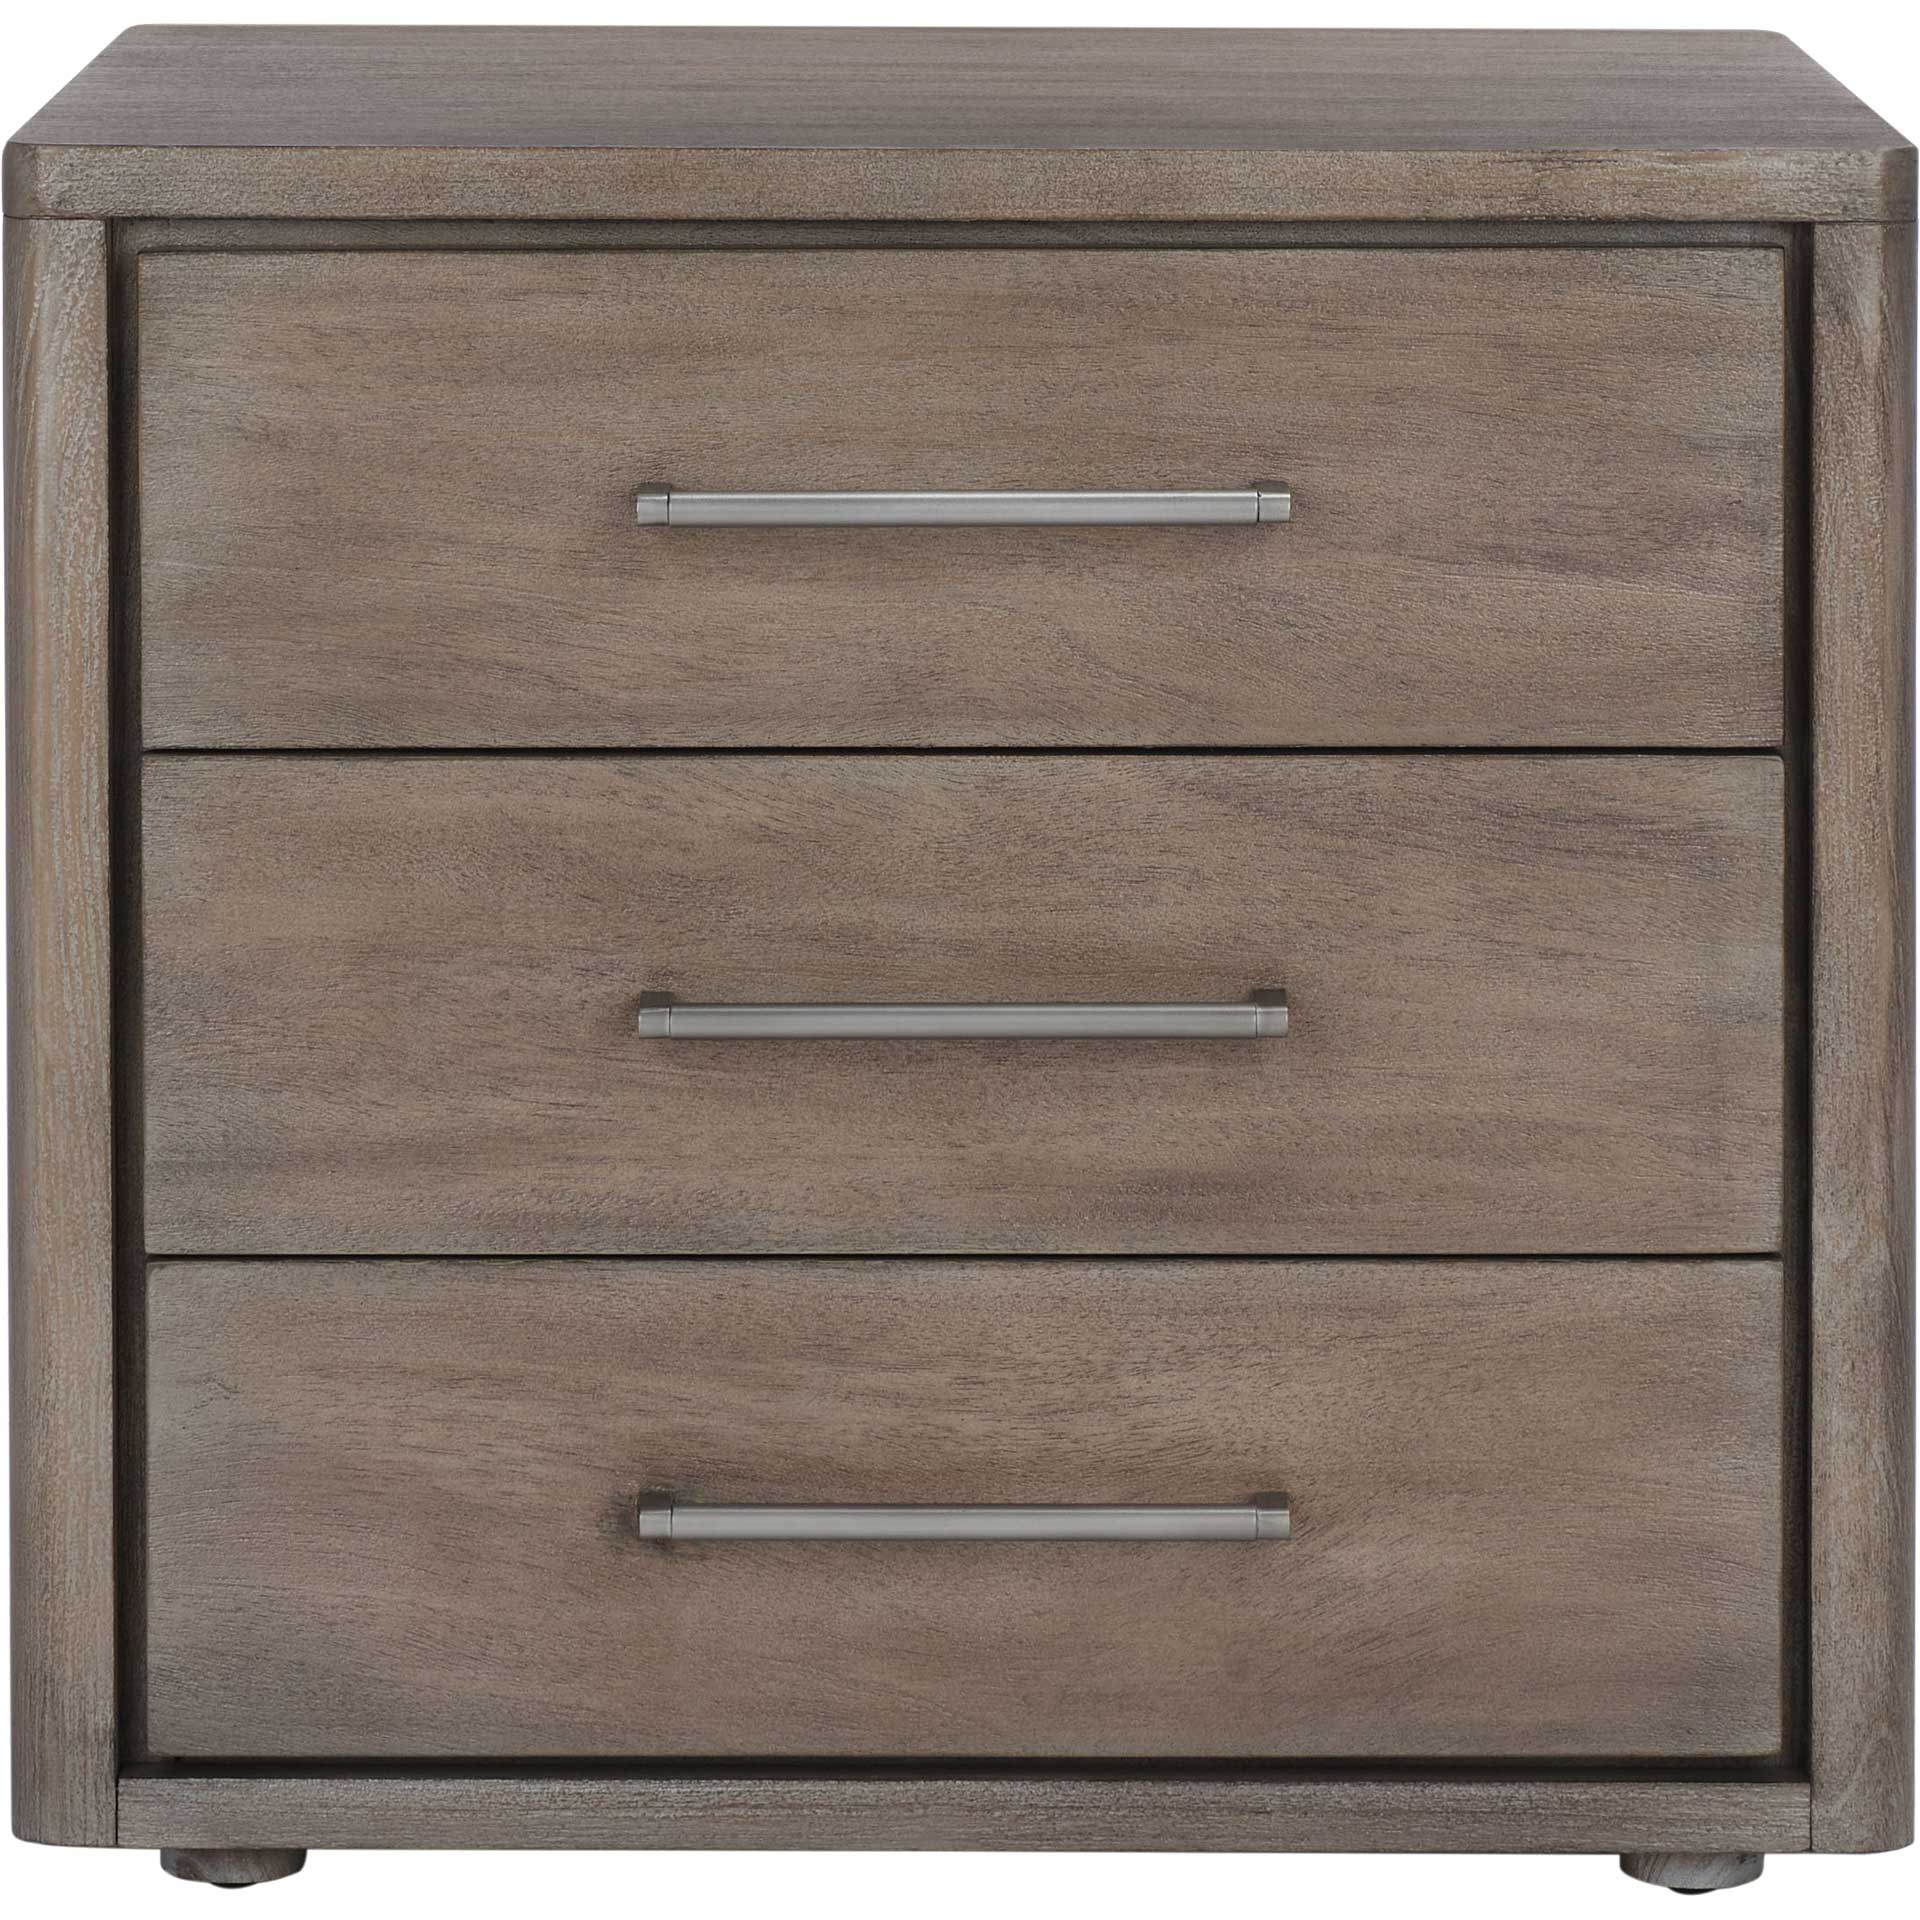 Romilly 3 Drawer Wood Nightstand Light Brown